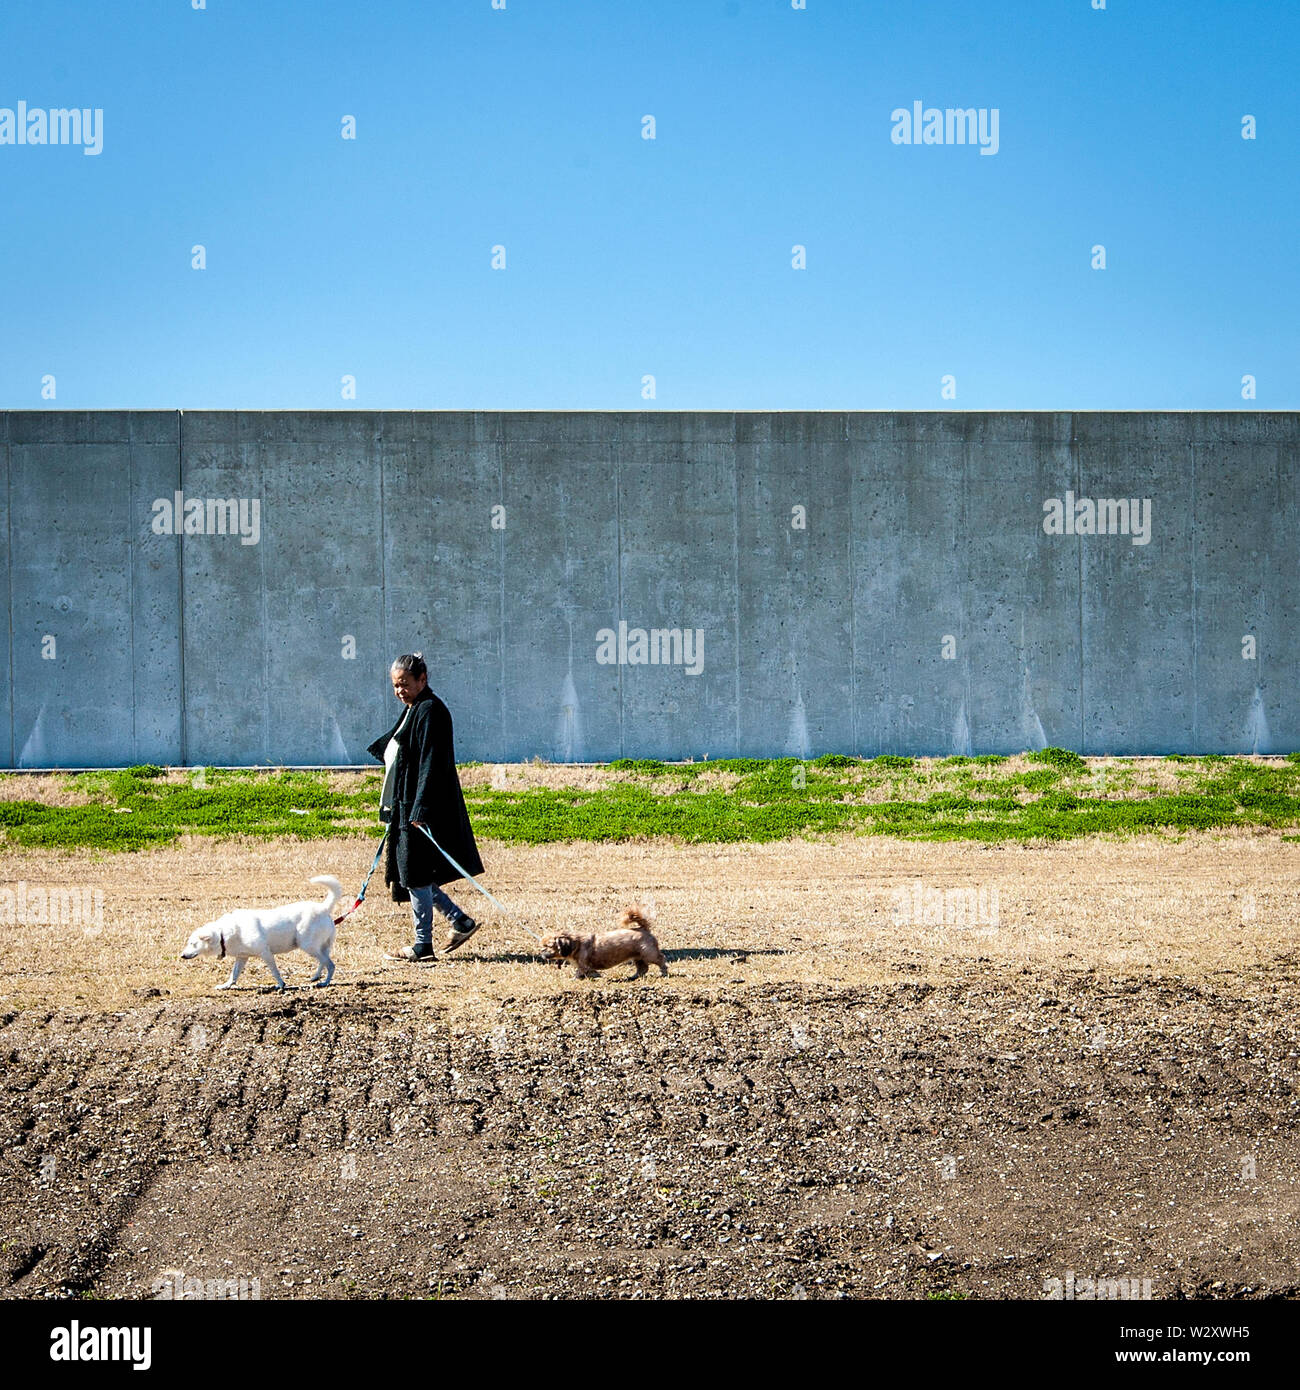 A woman walks a dog along the new flood protection on the restored dikes in the Lower Ninth Ward neighborhood.  The New Orleans neighborhood Lower Ninth Ward was devastated by the Hurricane Katrina and the aftermath. Five years after, the neighborhood is the biggest tourist attraction in the area. Stock Photo